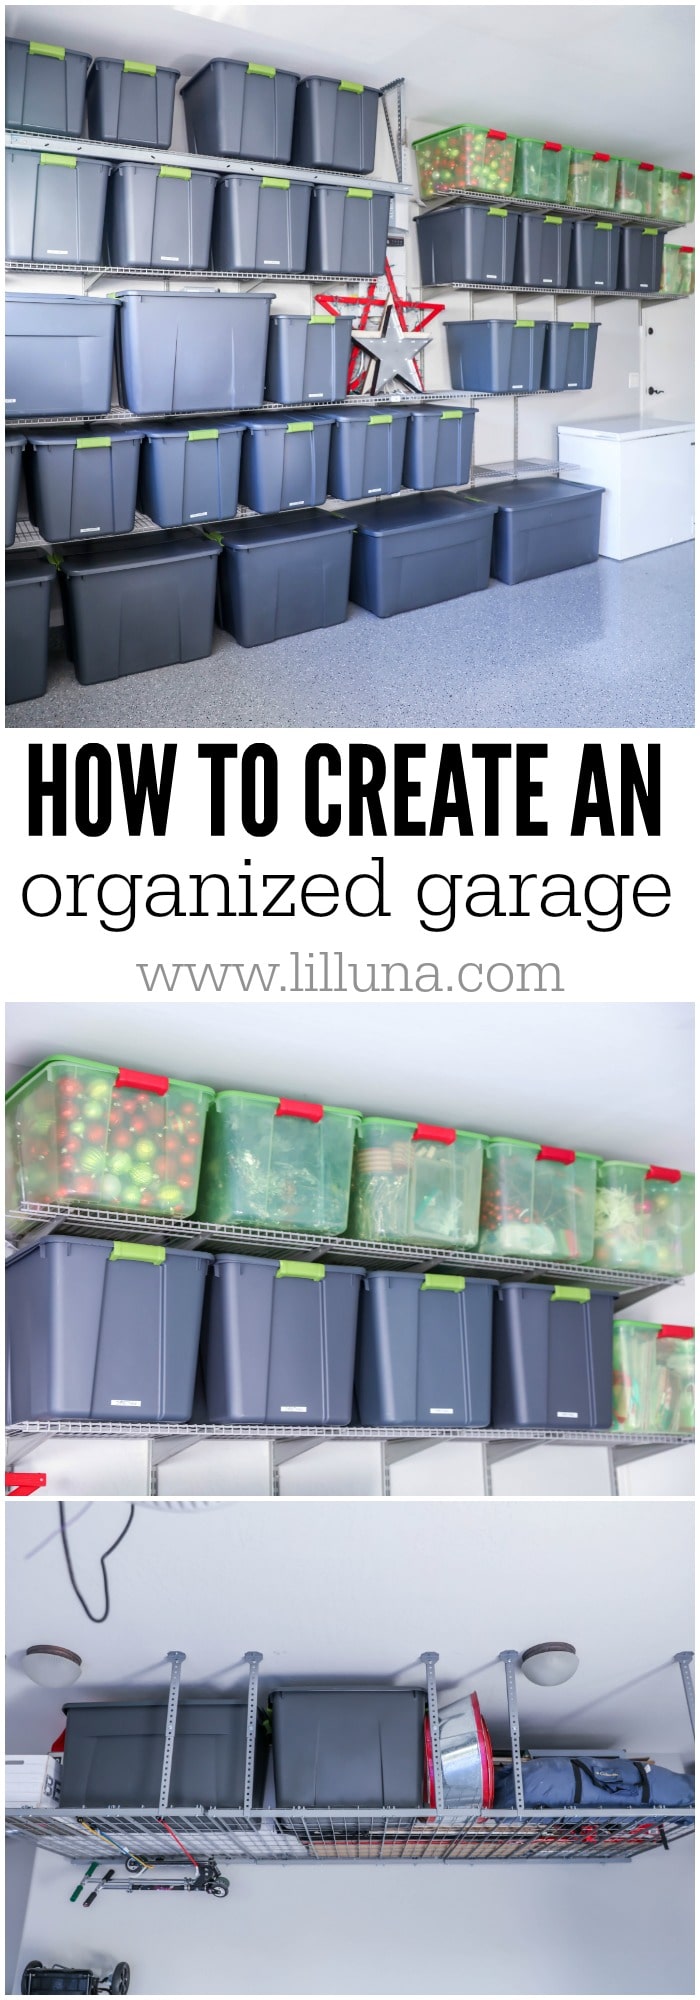 Tips and Tricks for creating an organized garage! It's so nice having order and knowing where everything is in the most neglected area of the house.